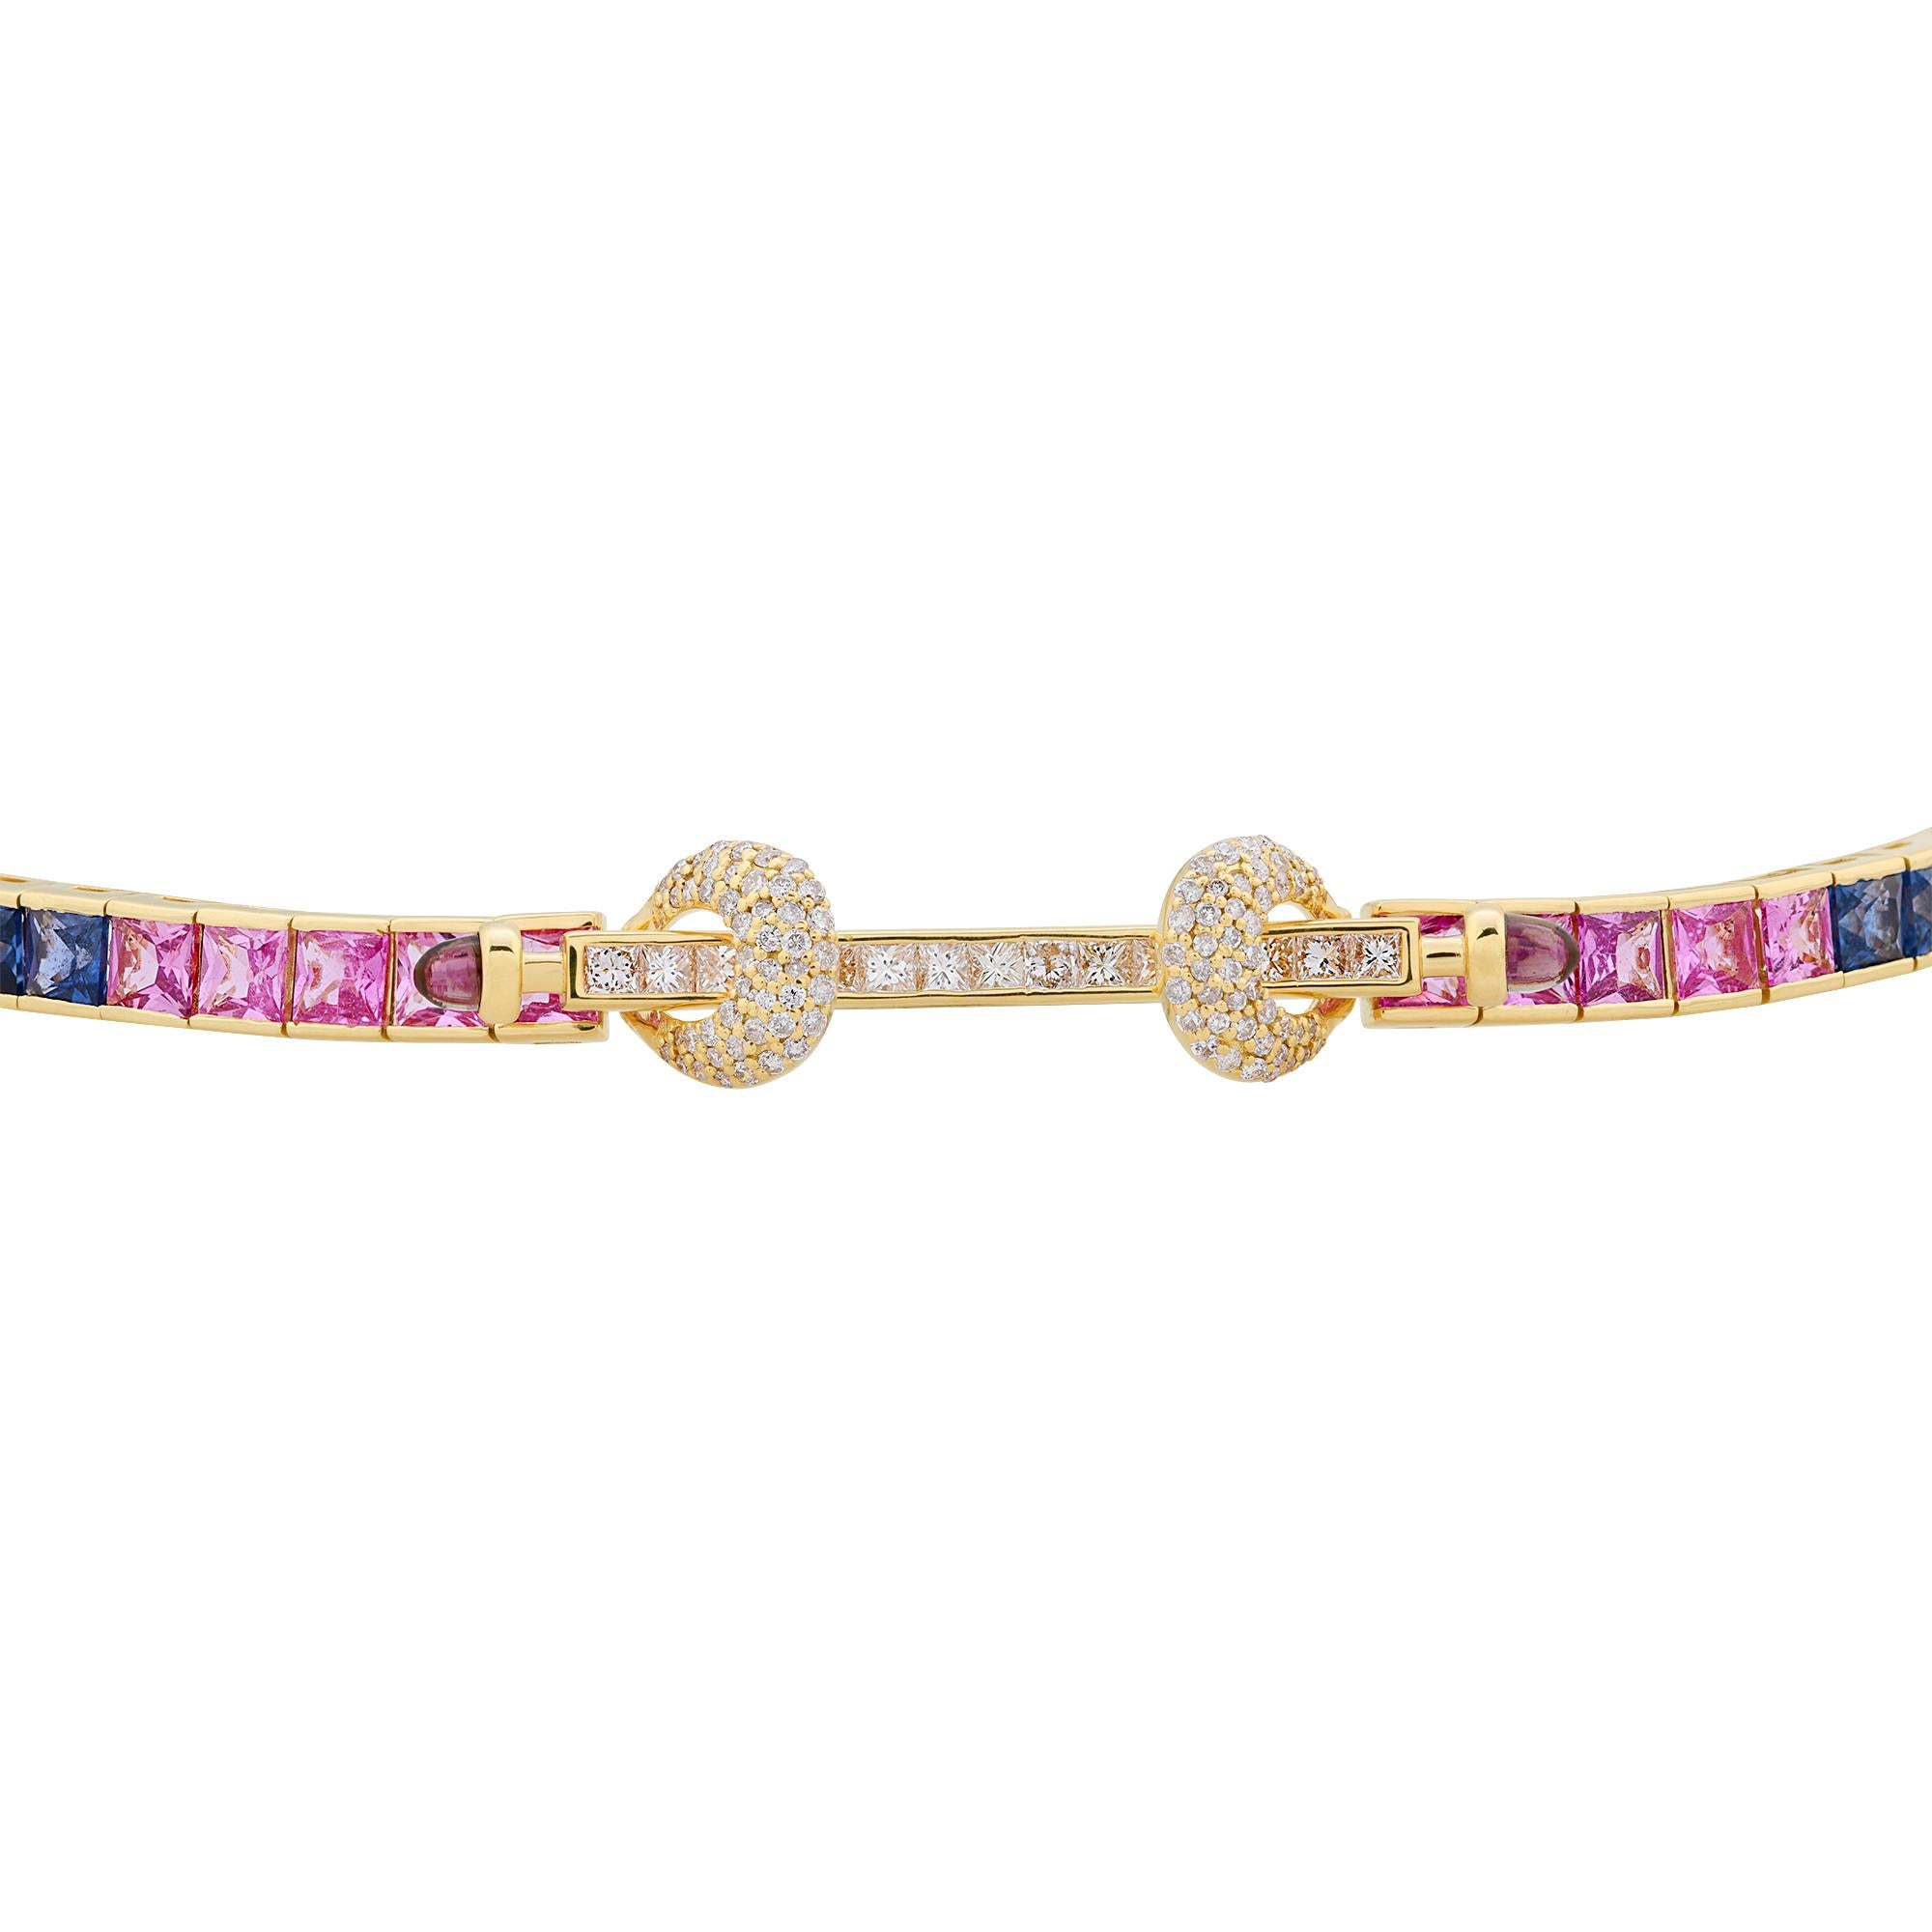 The focal point of this necklace is the captivating arrangement of multi-colored sapphire gemstones. Each sapphire exhibits a unique hue, ranging from deep blue to vibrant pink, yellow, and green. The combination of these enchanting colors creates a